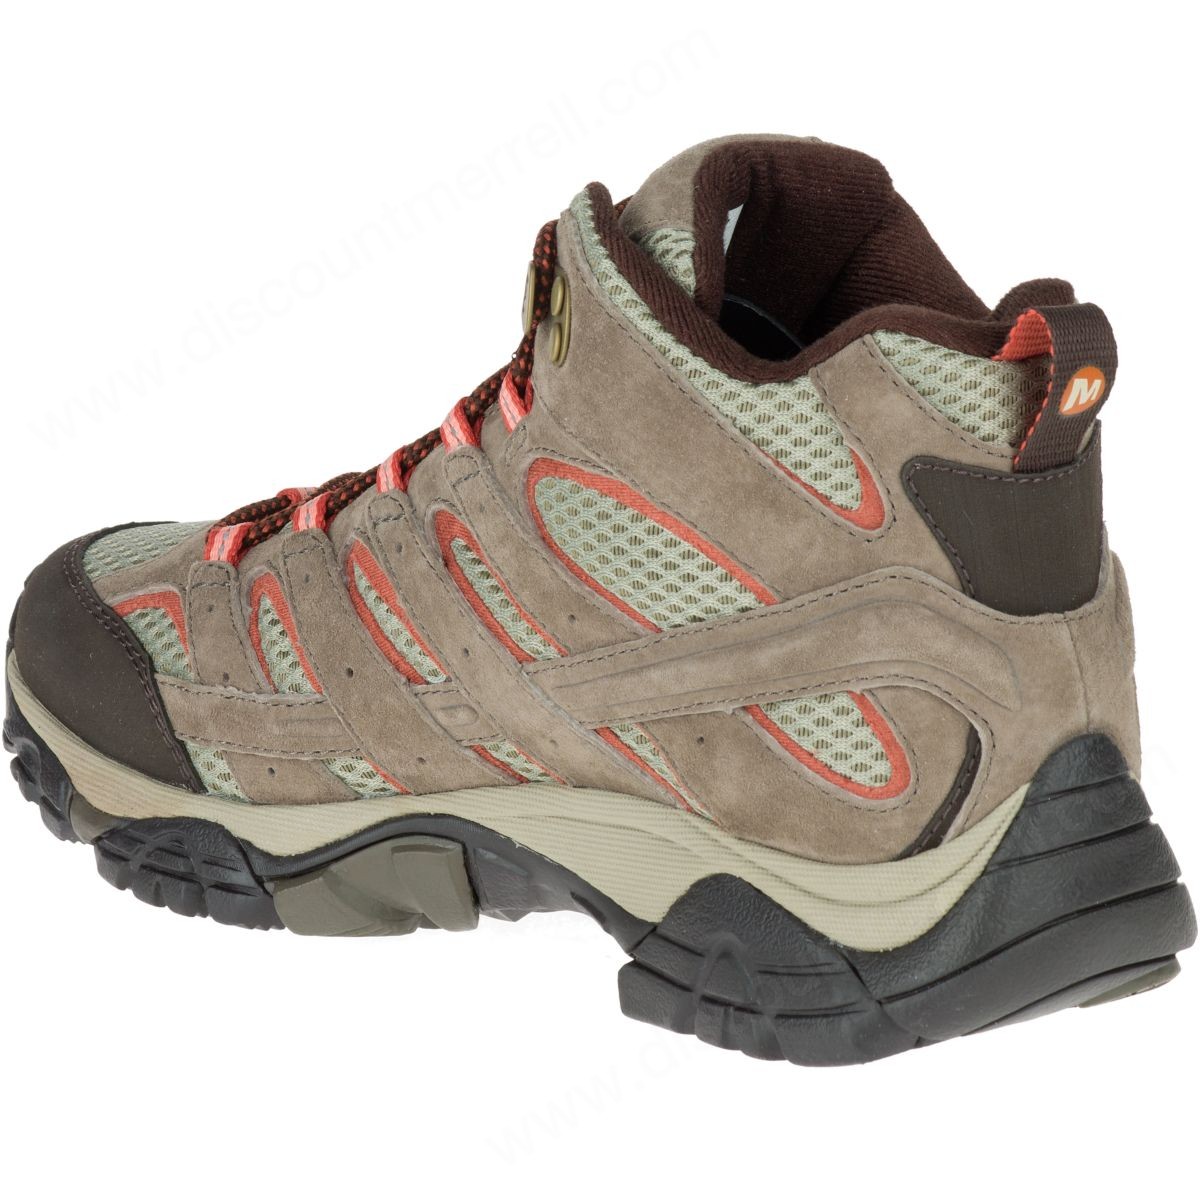 Merrell Lady's Moab Mother Of All Boots™ Mid Waterproof Wide Width Bungee Cord - -6